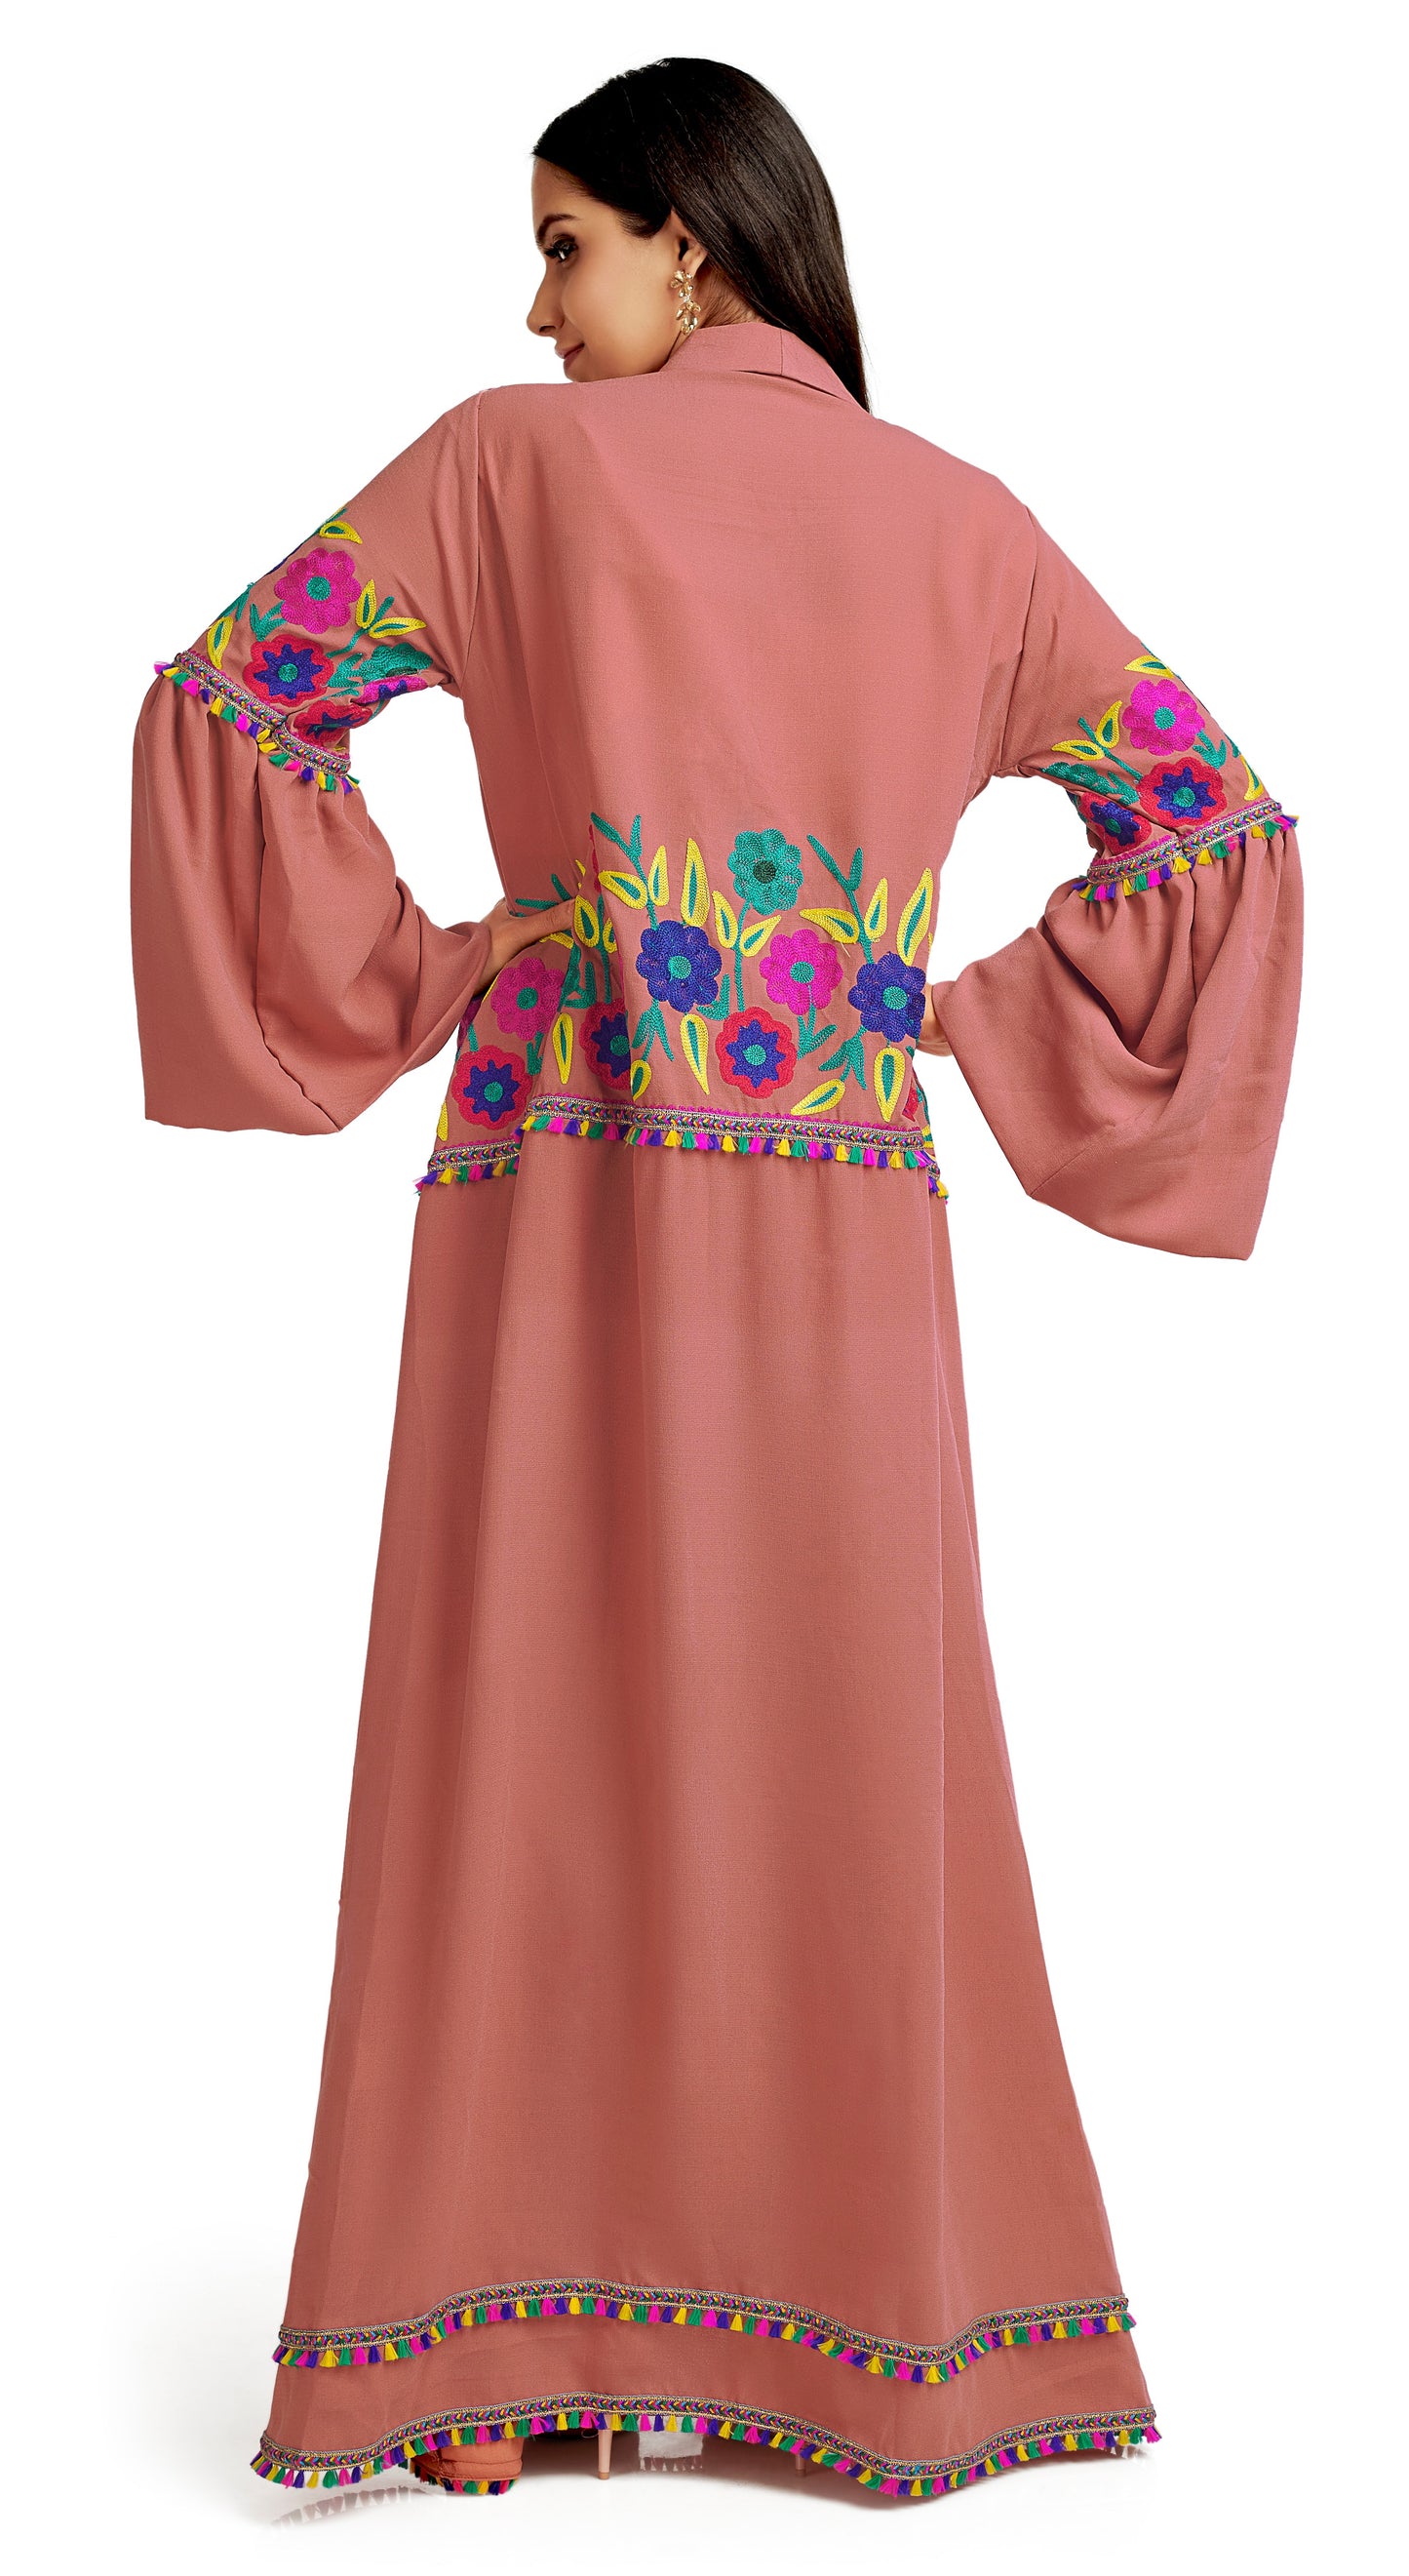 Multipurpose Long Cardigan in Rusty Pink with Colorful embroidery - Maxim Creation